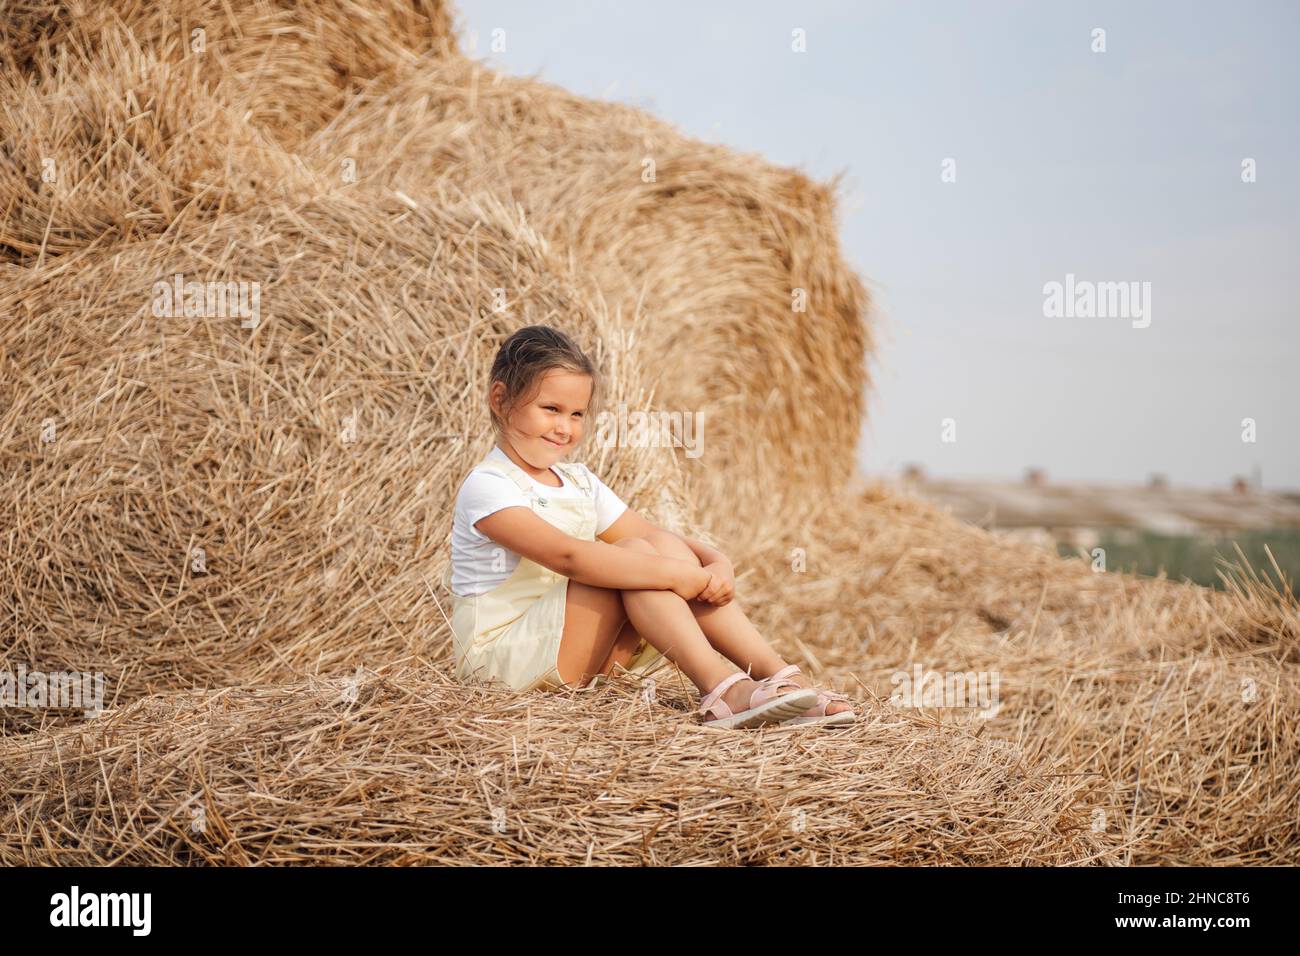 Small female kid with sly facial expression on haystack looking somewhere away slightly smiling. Time away from city in country field with tons of Stock Photo